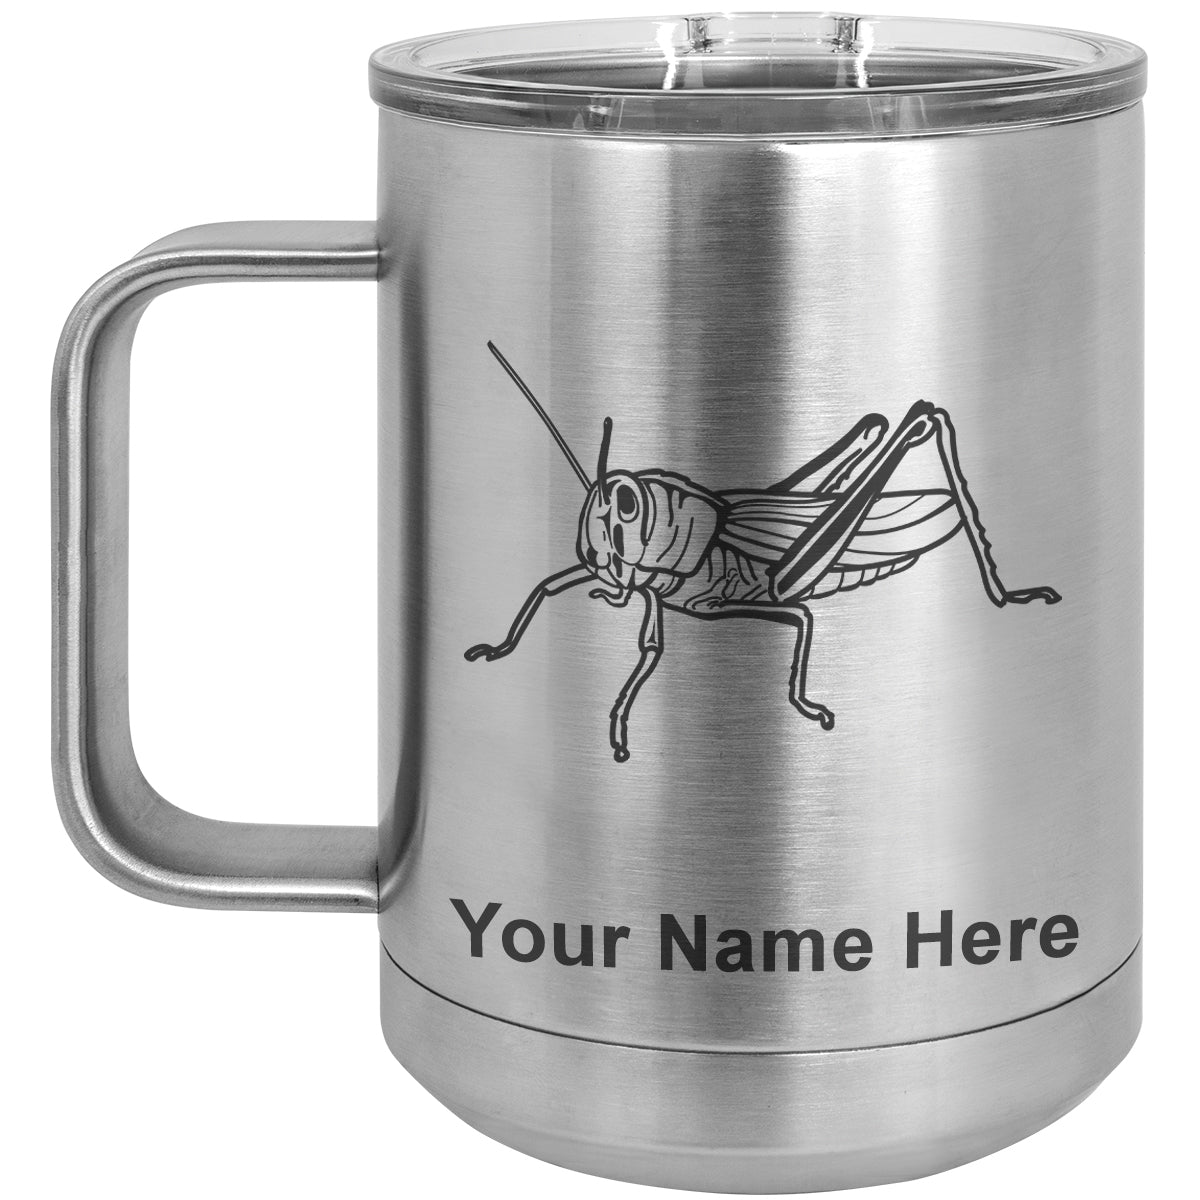 15oz Vacuum Insulated Coffee Mug, Grasshopper, Personalized Engraving Included